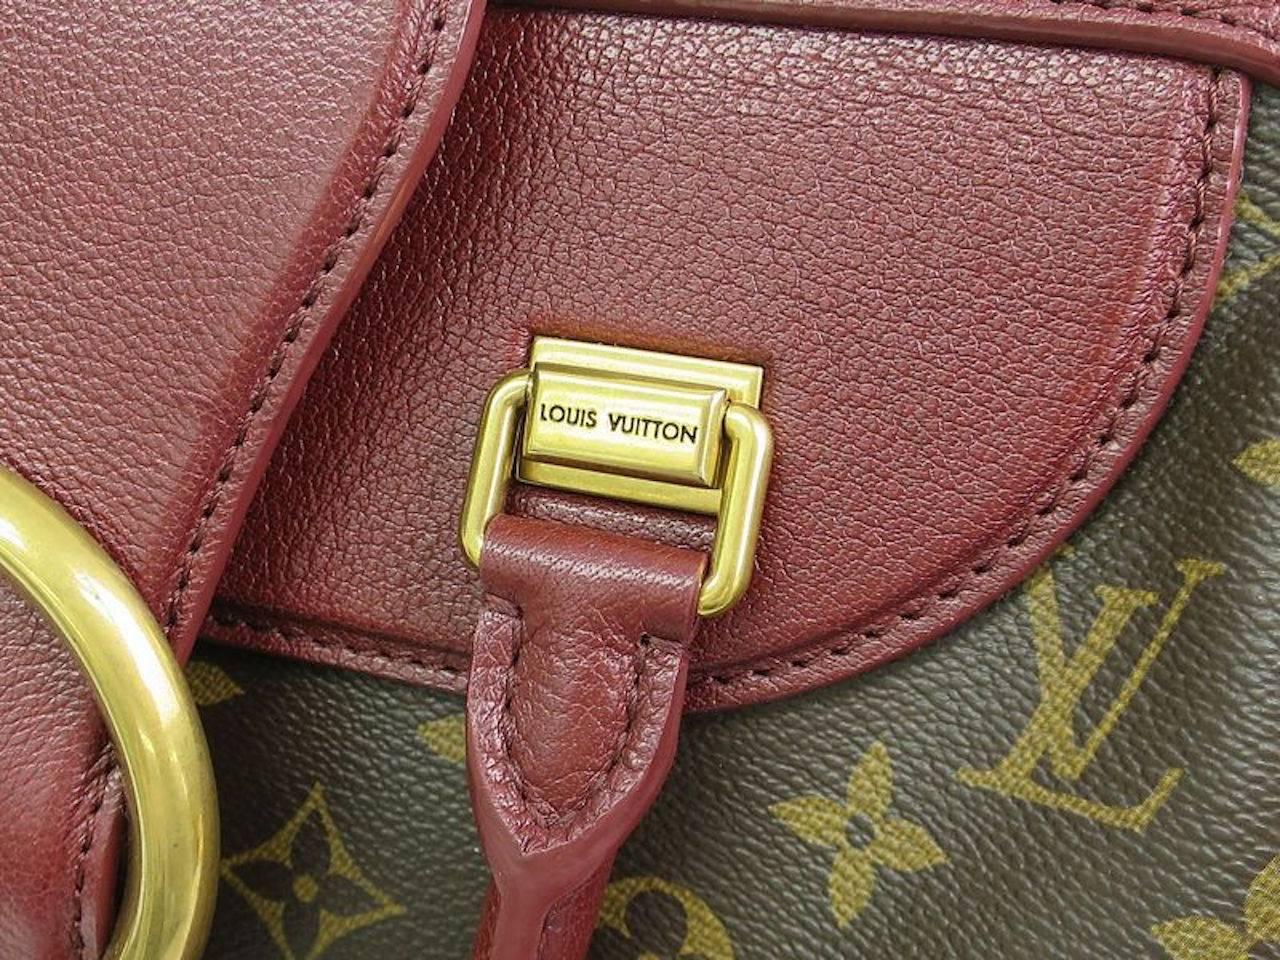 CURATOR'S NOTES

Louis Vuitton Limited Edition Monogram Canvas Red Speedy Top Handle Satchel Bag  

Bold, chic, sophisticated and all you.

Monogram canvas
Gold hardware
Zipper closure
Made in France
Date code 
Handle 15.5"
Measures 12" W